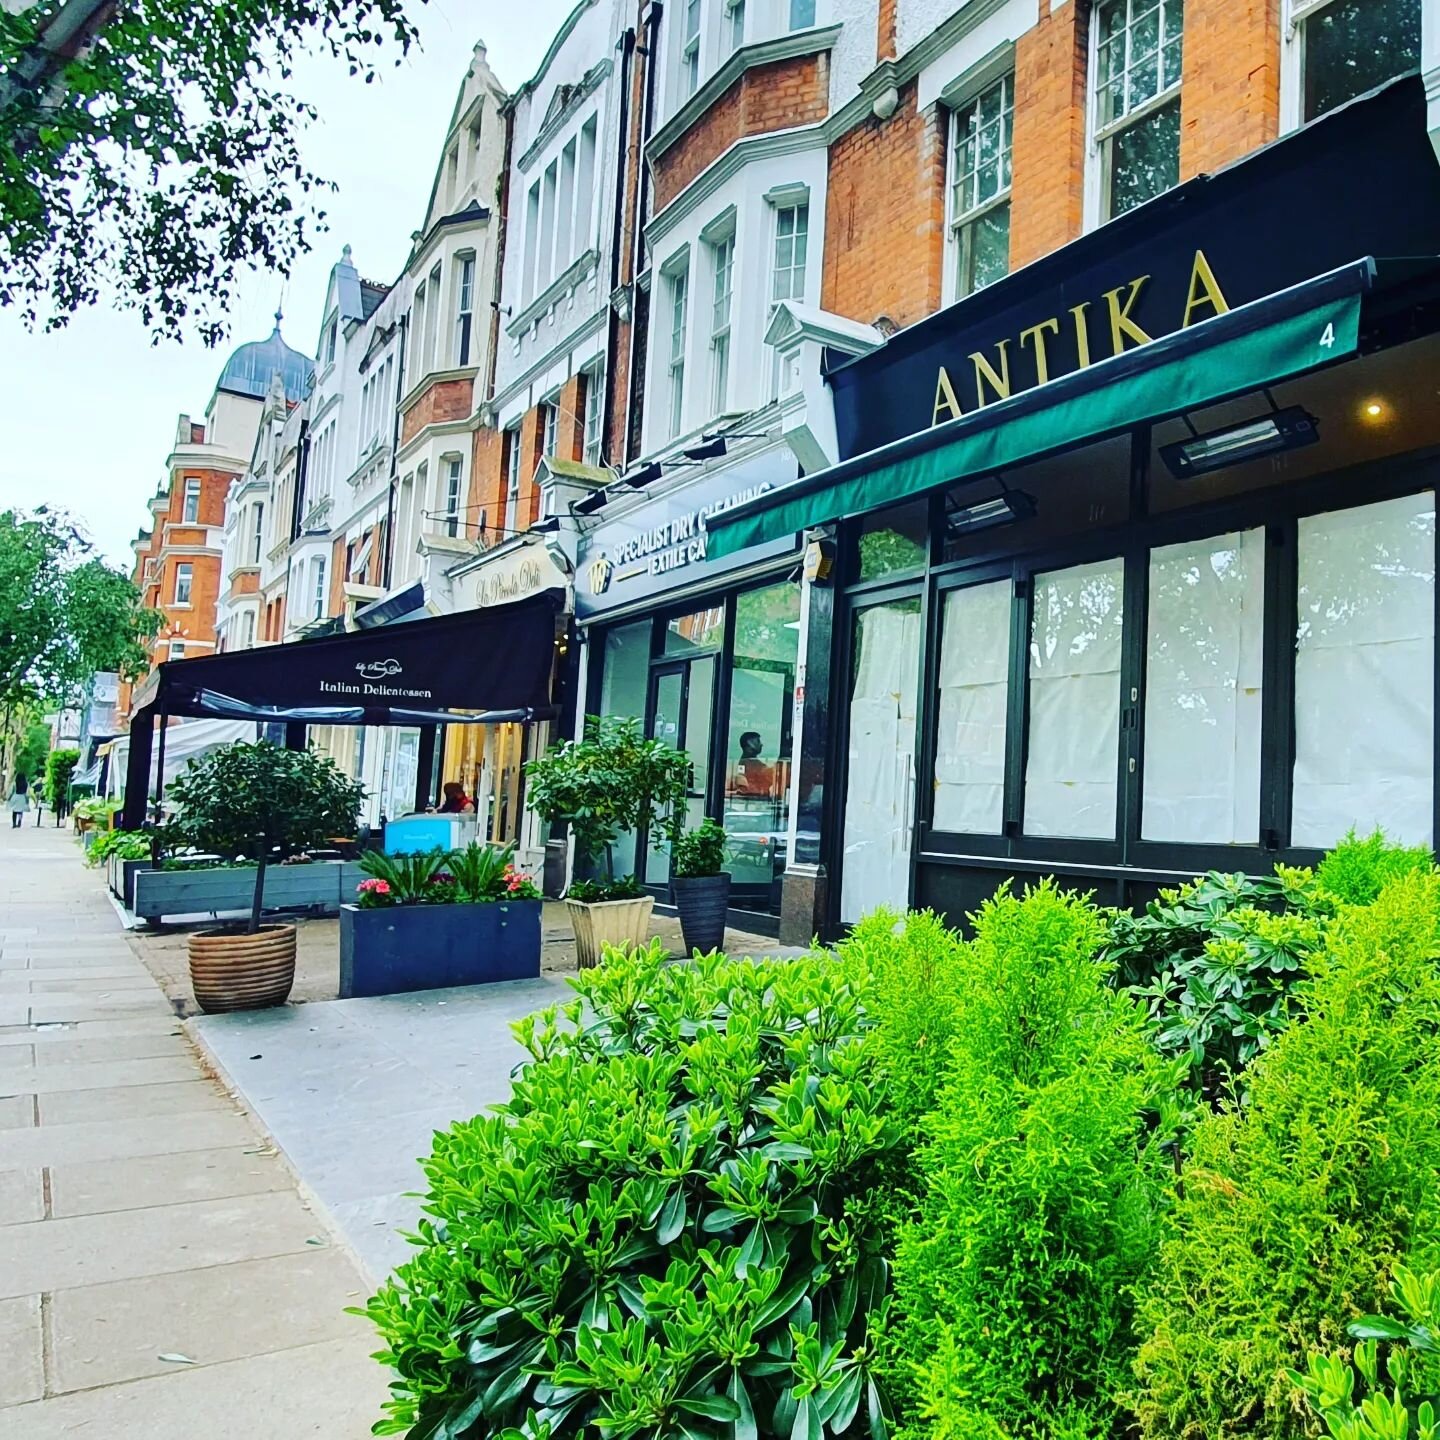 Planning Permission Granted! 👍

Pleased to have secured planning permission from London Borough of Westminster for a restaurant extraction system for one of our Maida Vale clients. We have been working on a number of planning matters associated with